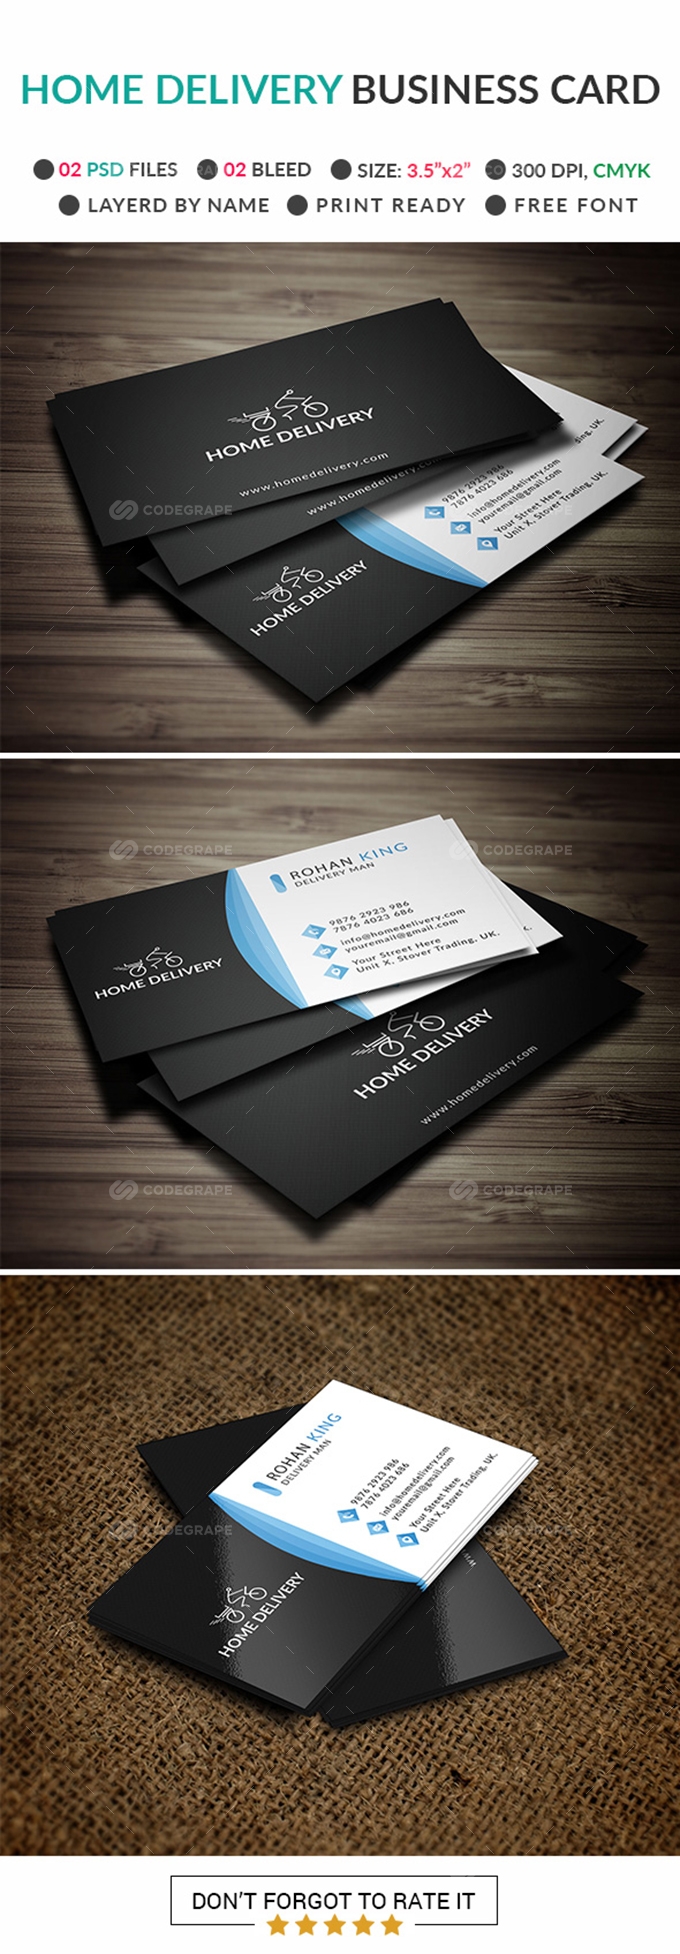 Home Delivery Business Card